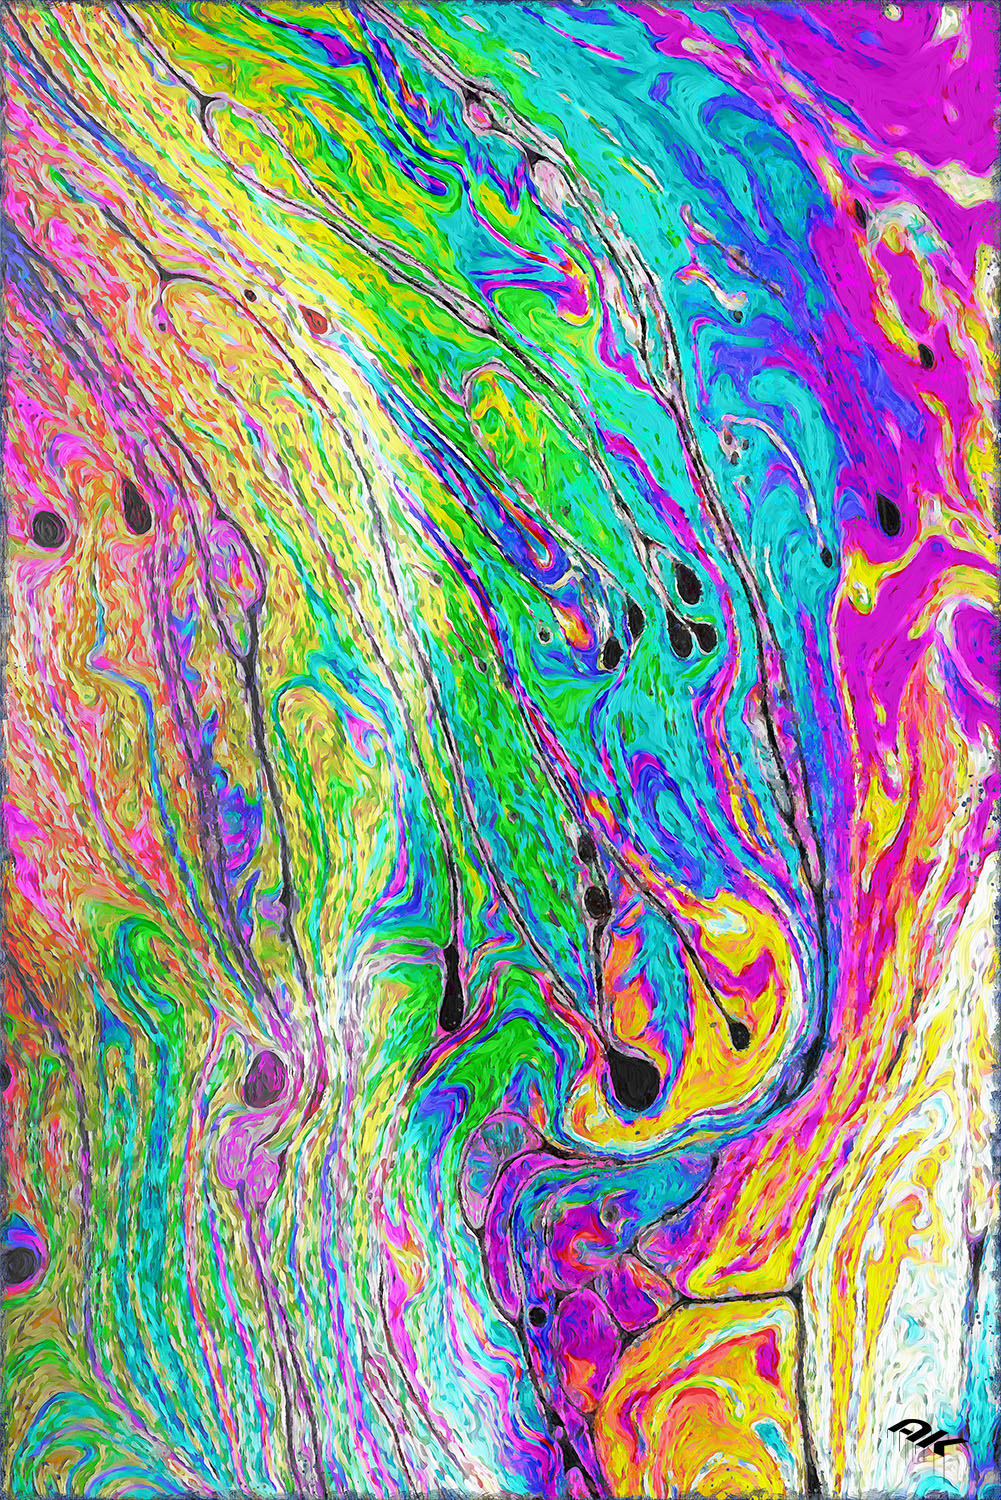 Abstract background made from soap bubble reflecting light